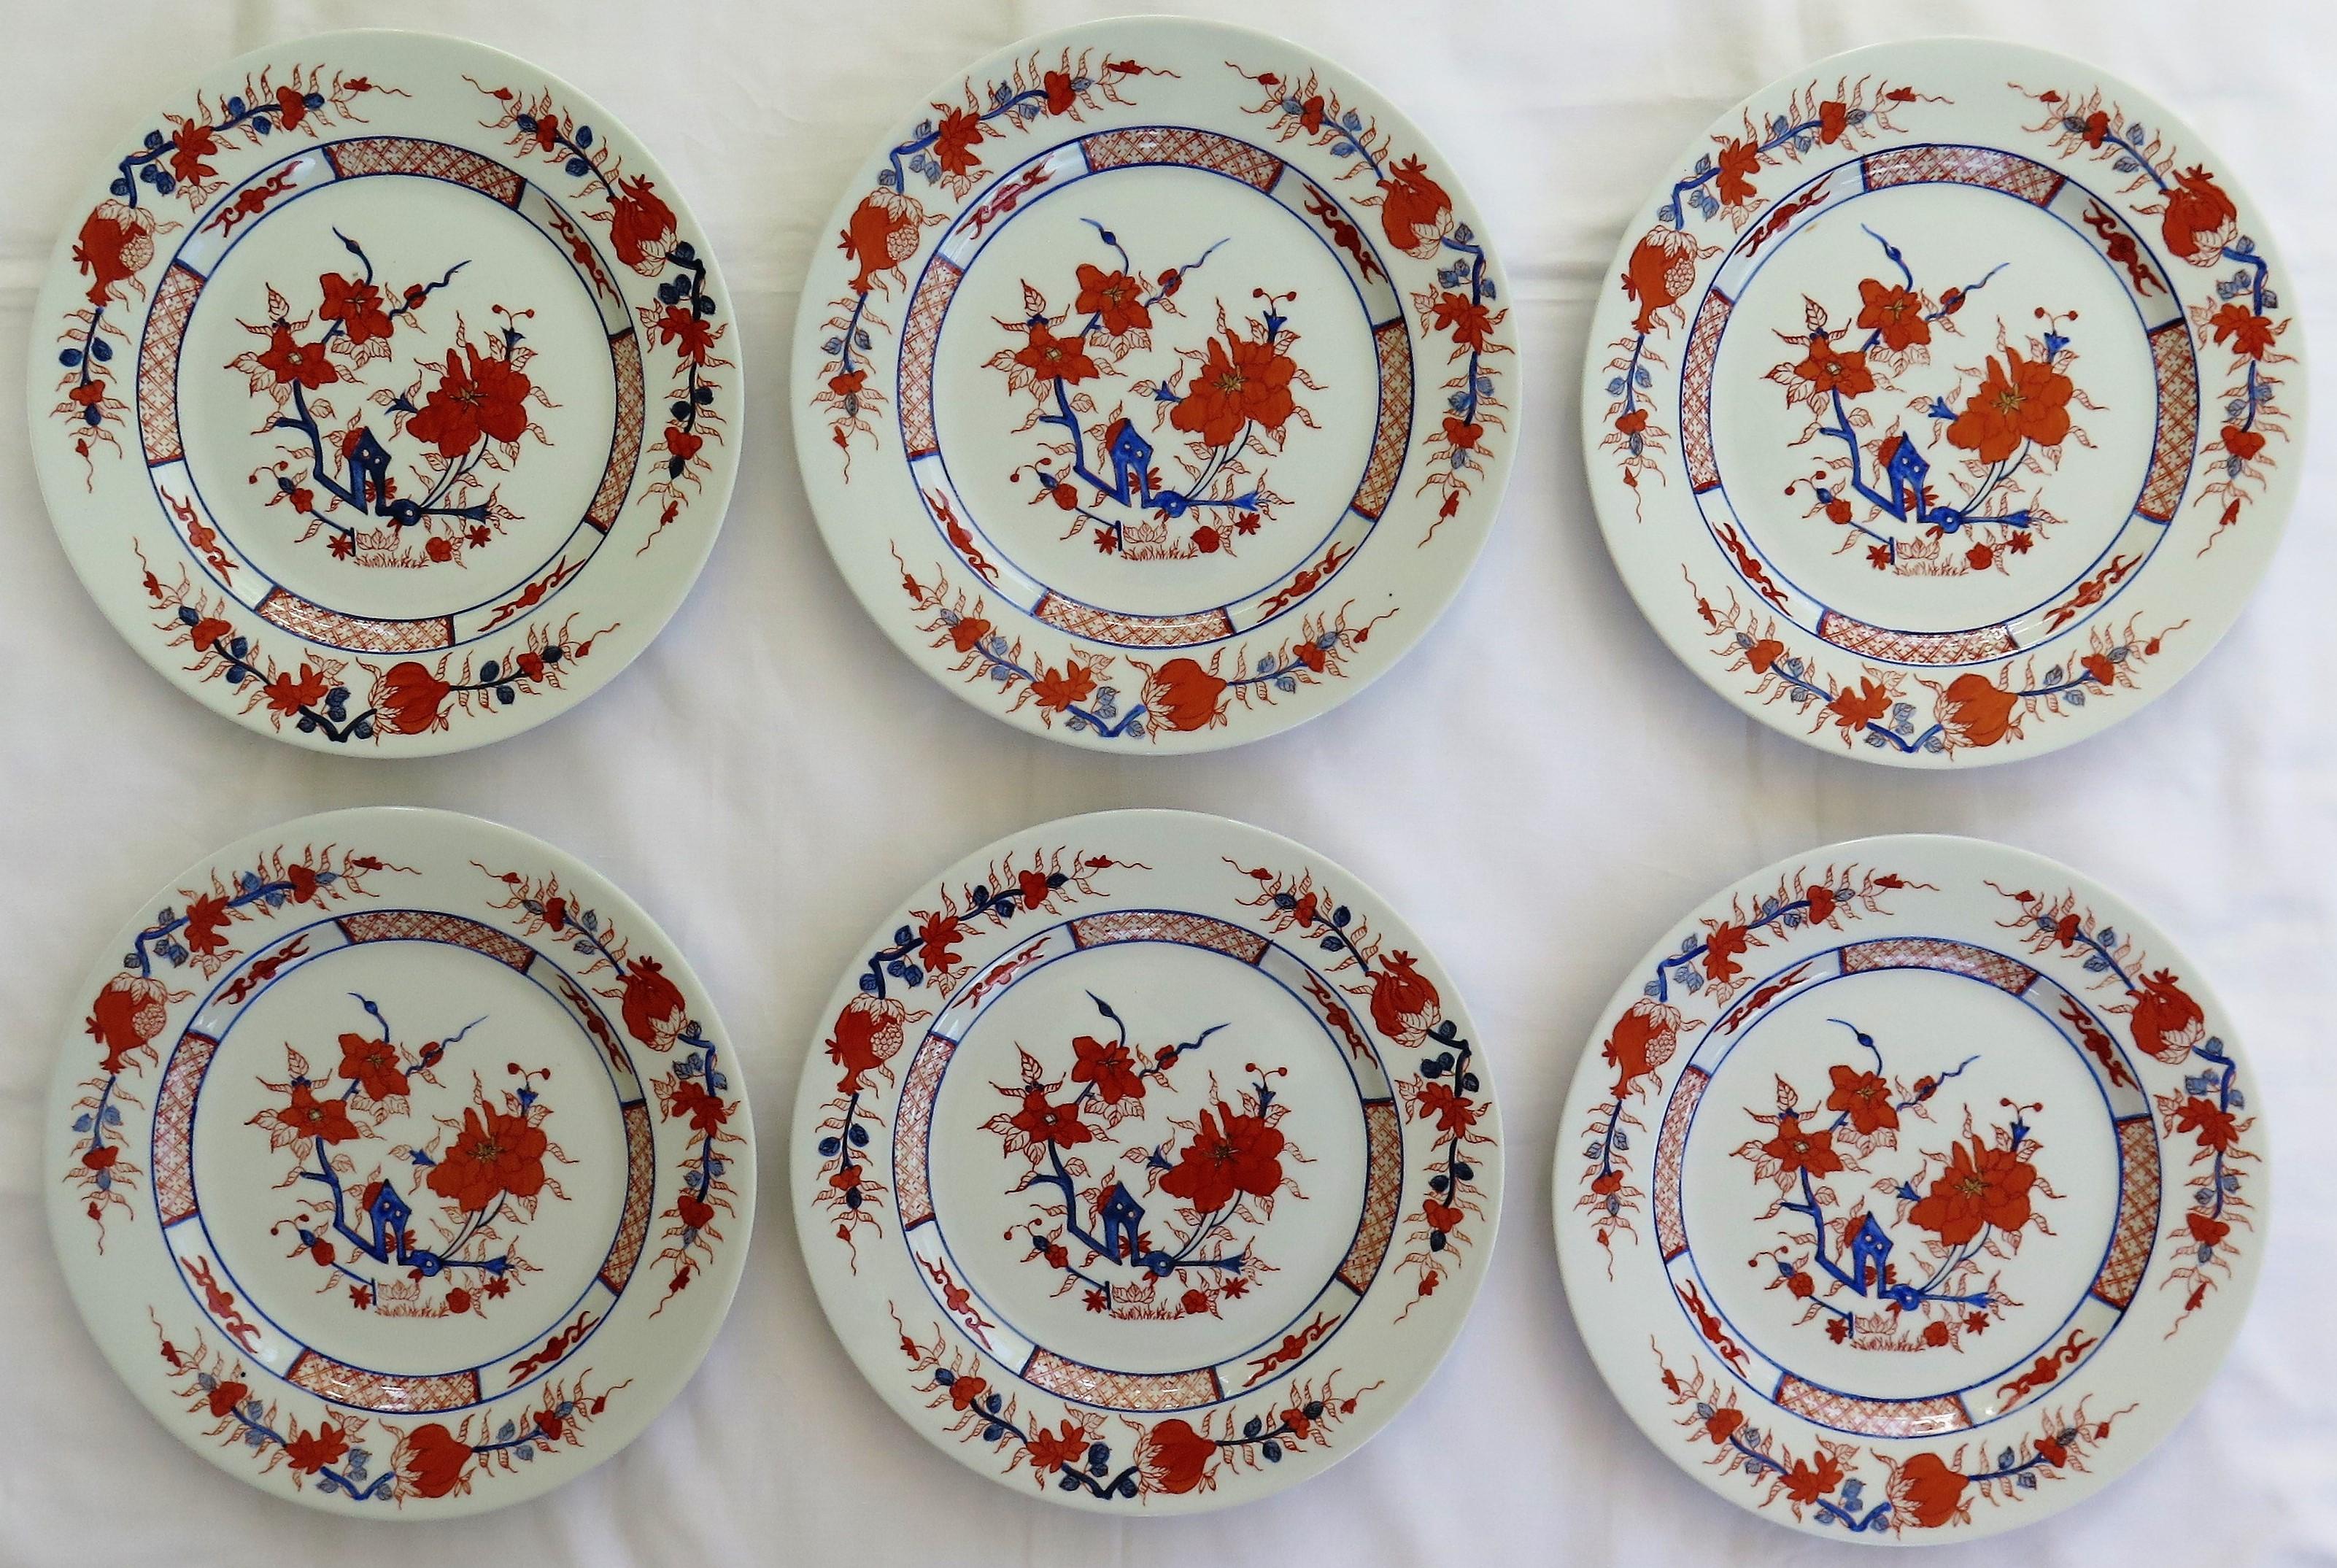 These are a very good set of six large Chinese Export porcelain dinner plates.

Each plate is hand decorated in a bold floral imari pattern using brick red and cobalt blue enamels in various shades.The plates have various borders including an